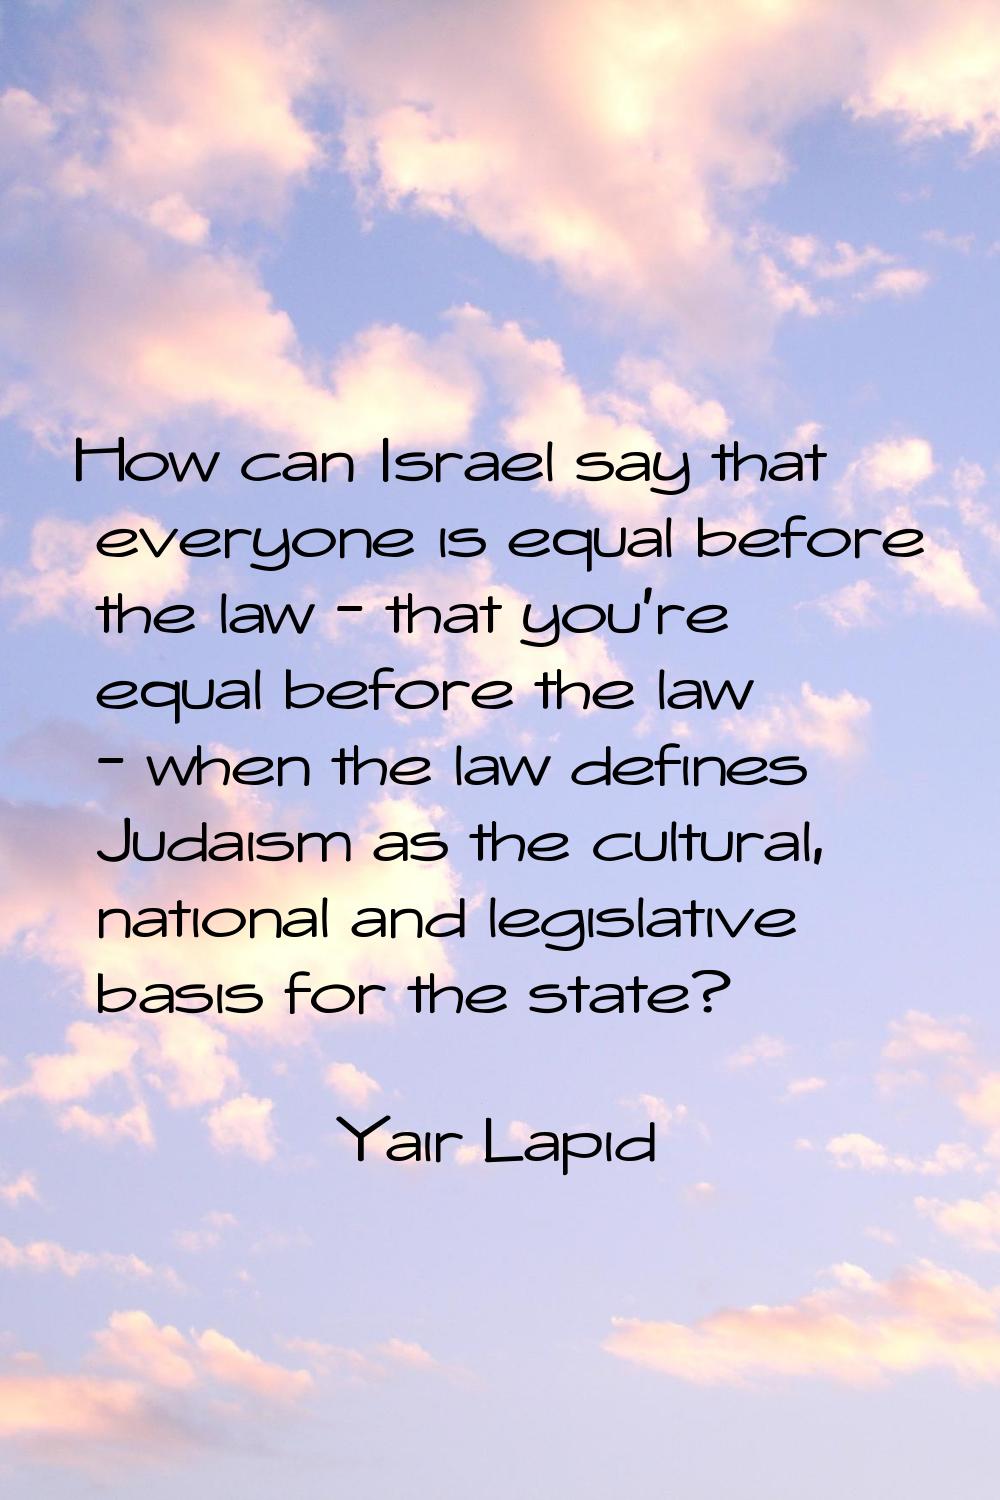 How can Israel say that everyone is equal before the law - that you're equal before the law - when 